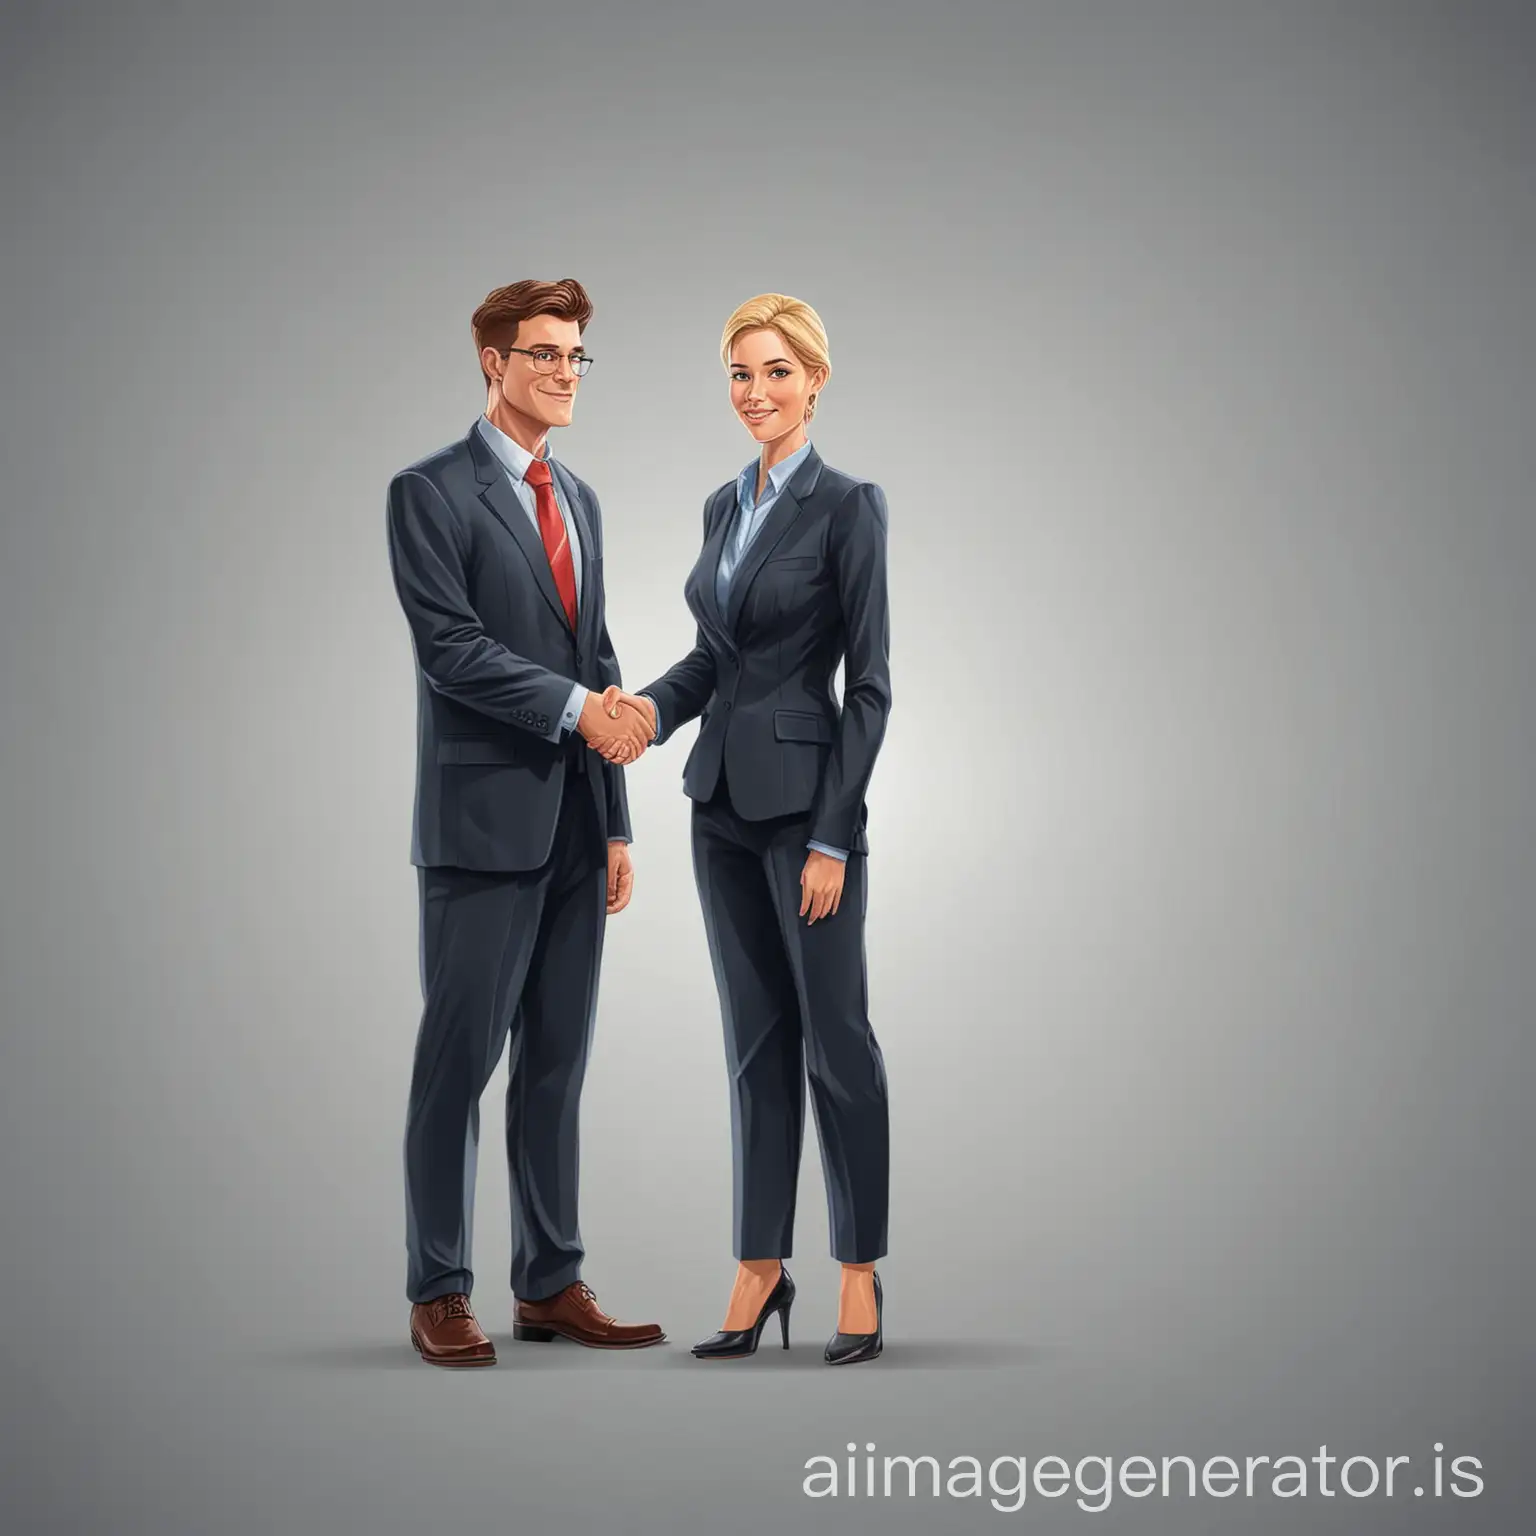 CEO-and-Office-Handshake-Professional-Business-Interaction-in-Vector-Illustration